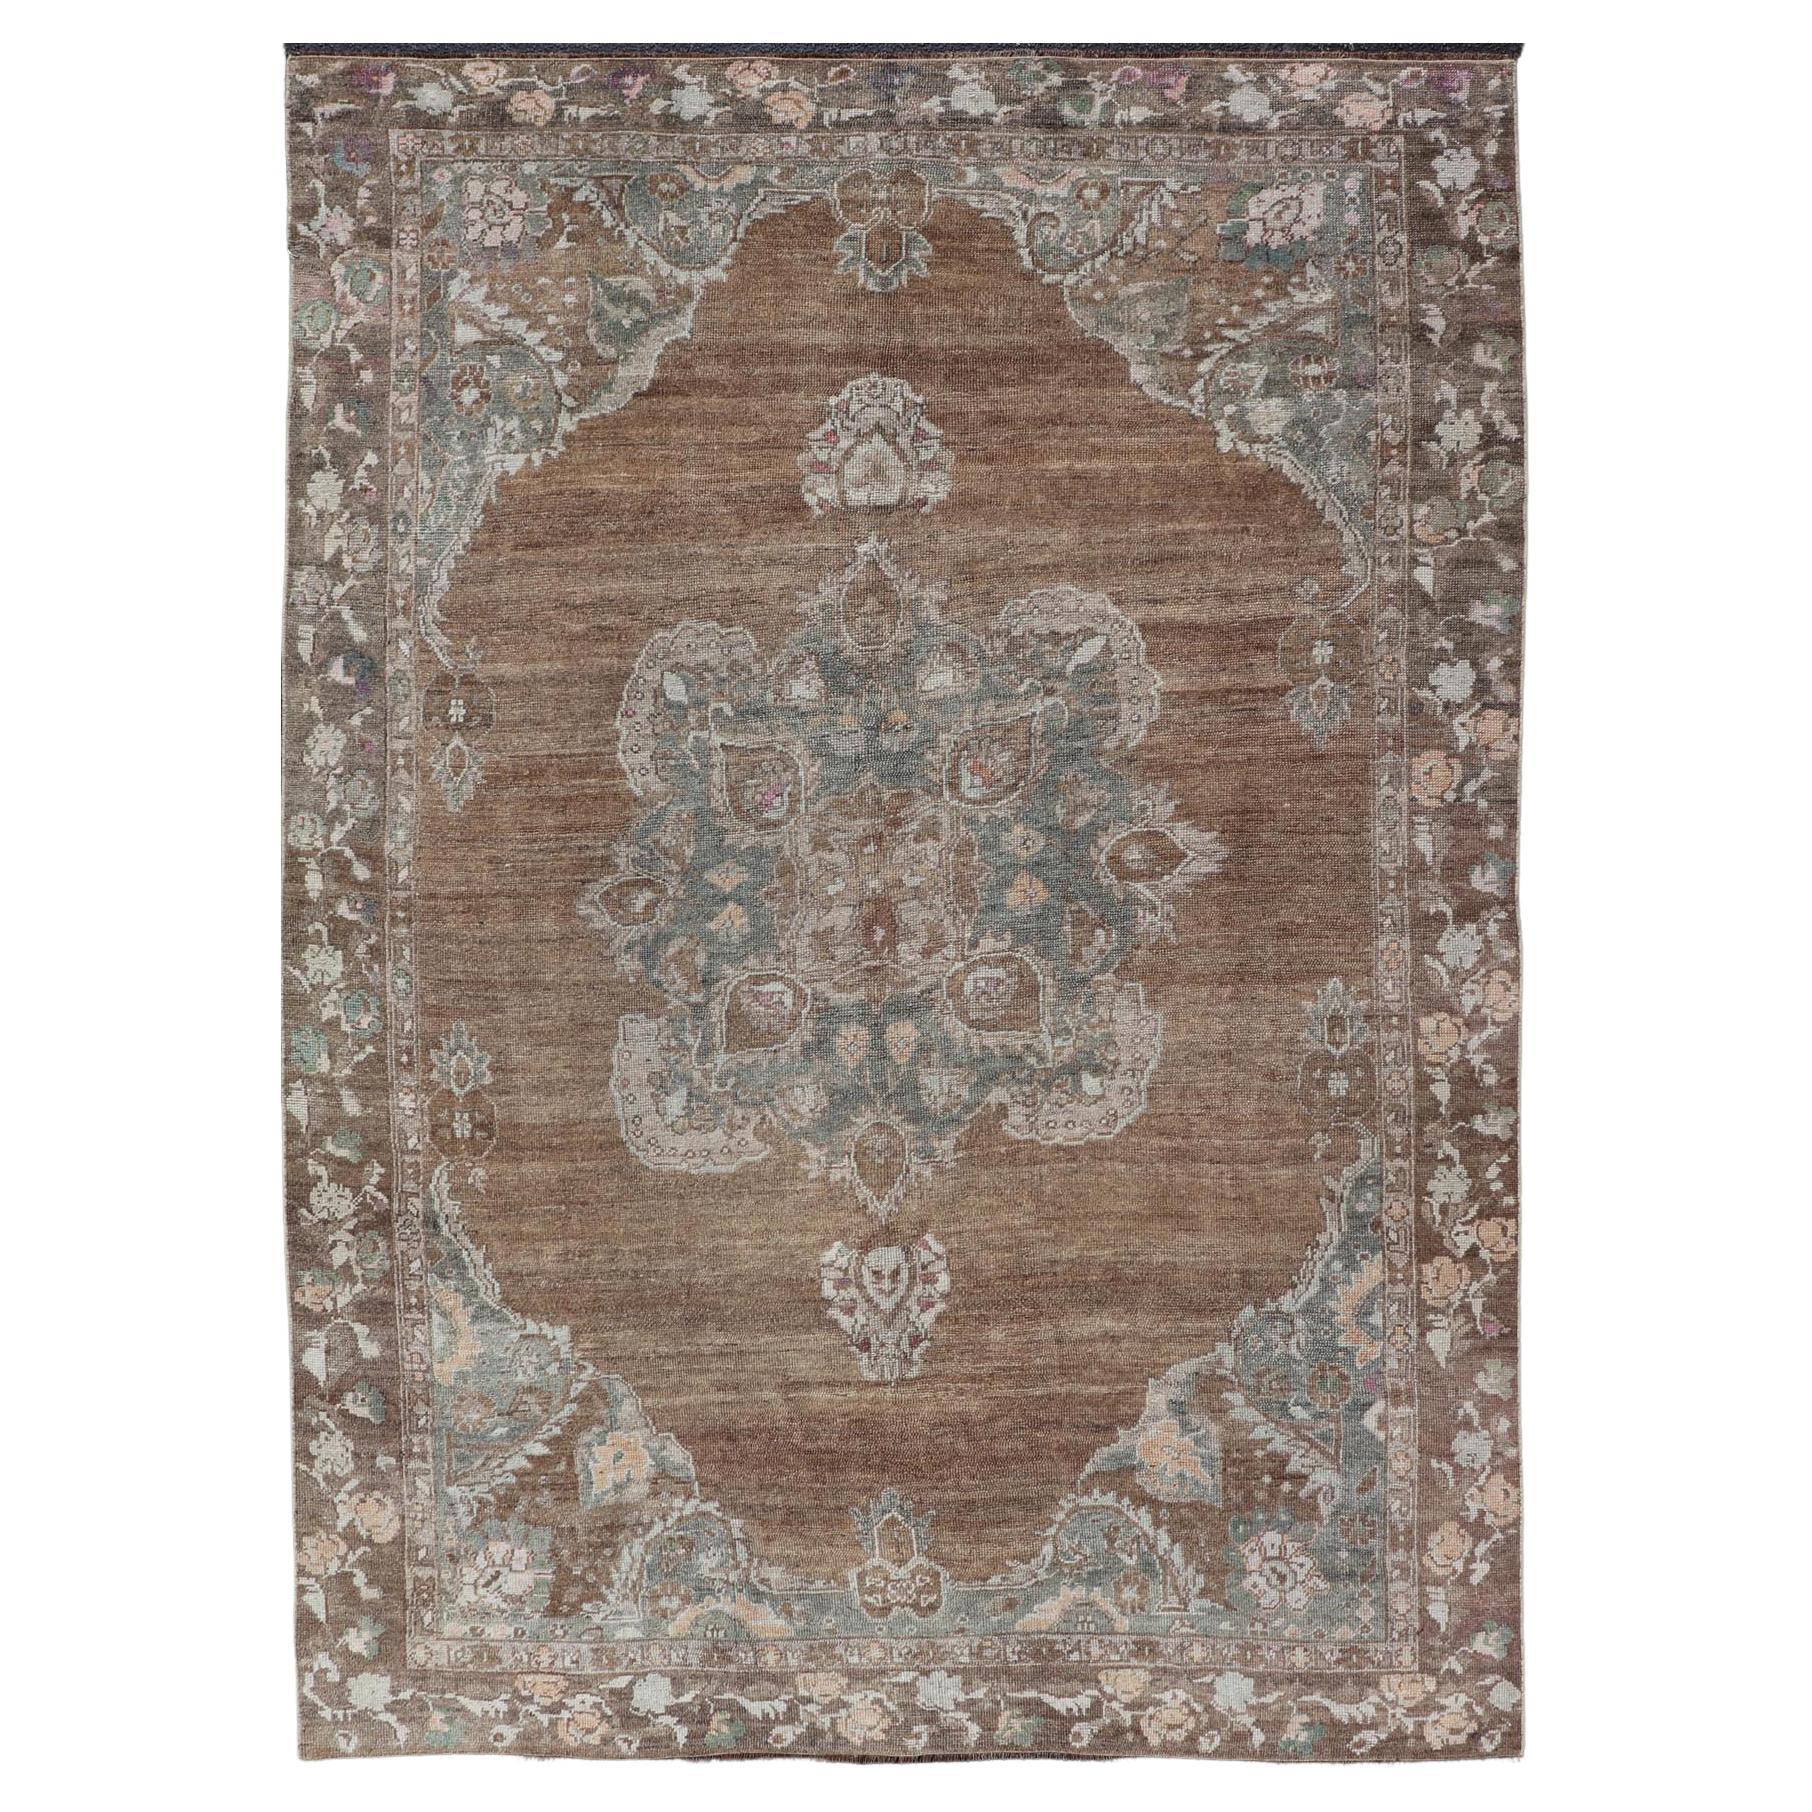 Vintage Turkish Kars Rug with Floral Medallion in Camel, Tan, Taupe and Grey